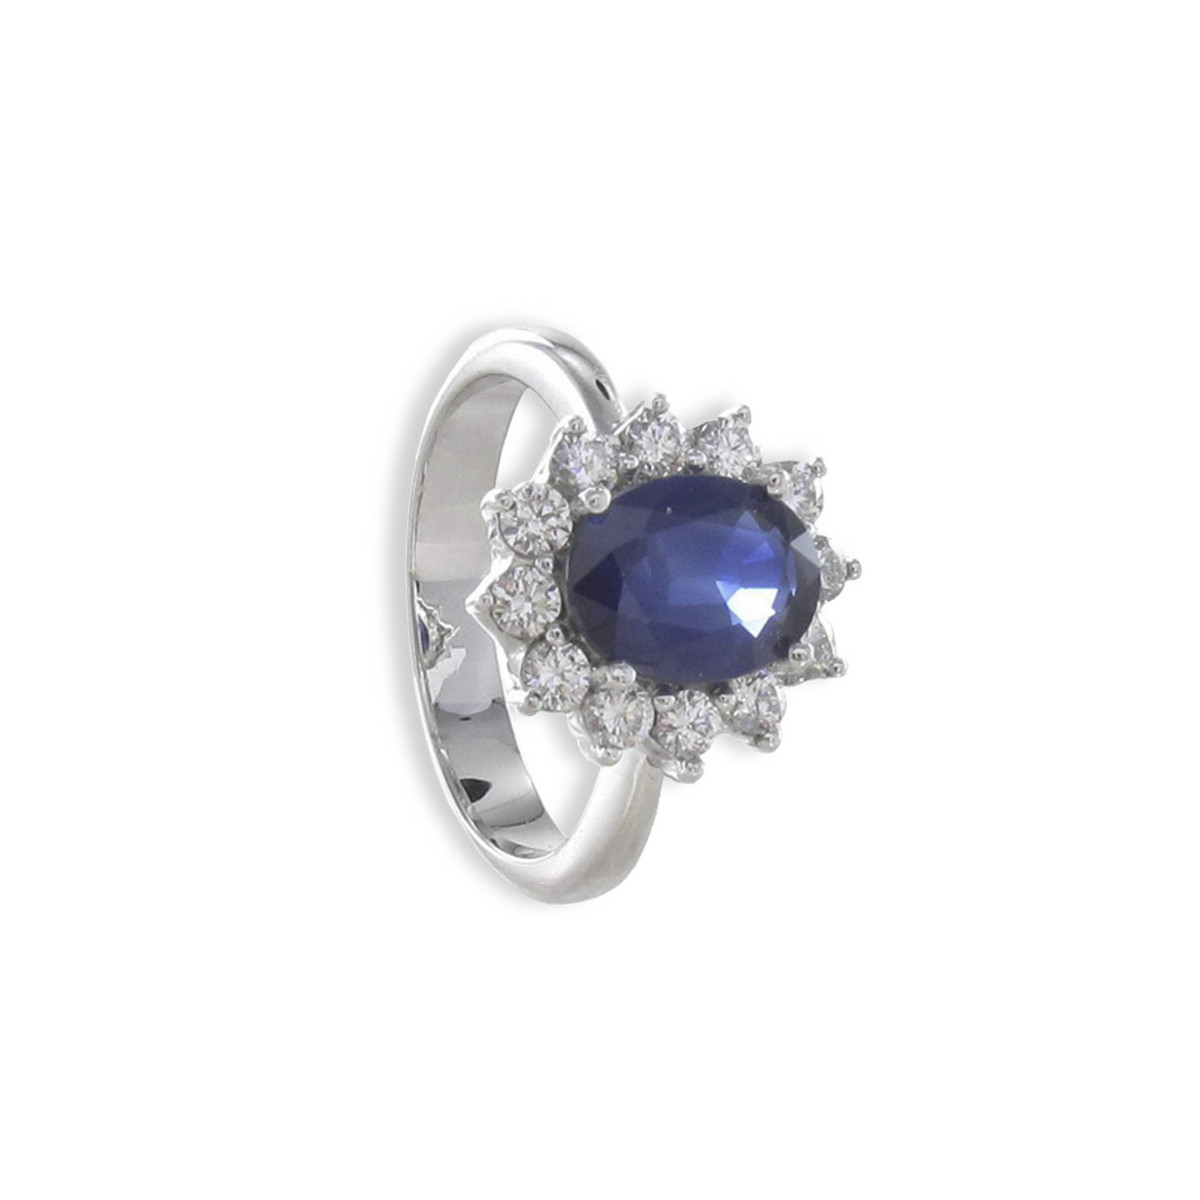 GOLD SAPPHIRE AND12 DIAMONDS RING